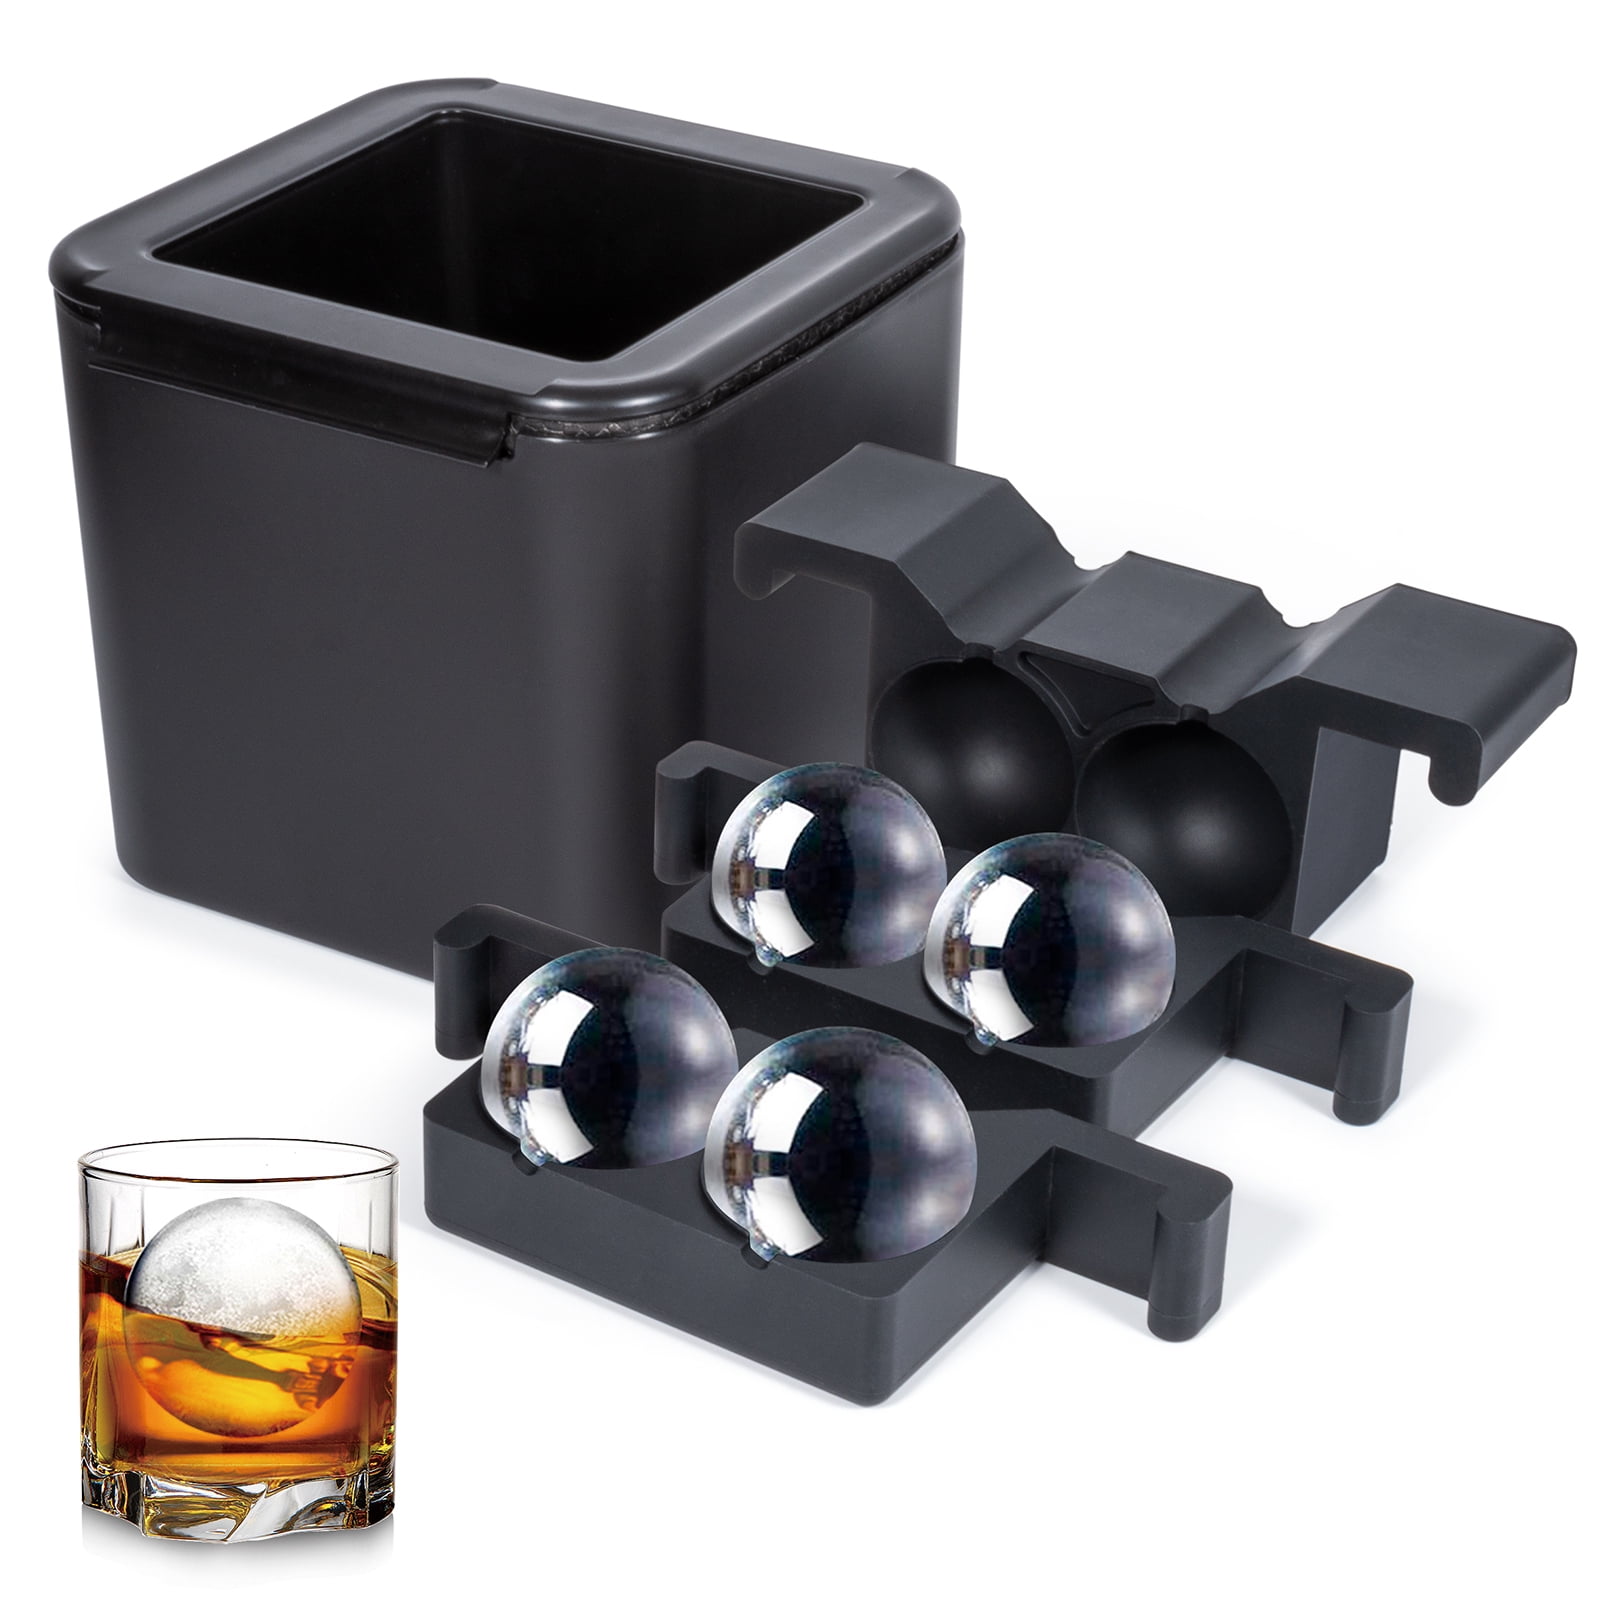 True Cubes Clear Ice Cube Maker, Clear Ice Mold - 4 Large Clear Ice Cubes  for Cocktails, Drinks & Whiskey - BPA-Free Silicone Square Ice Cube Mold -  Whiskey Gif…